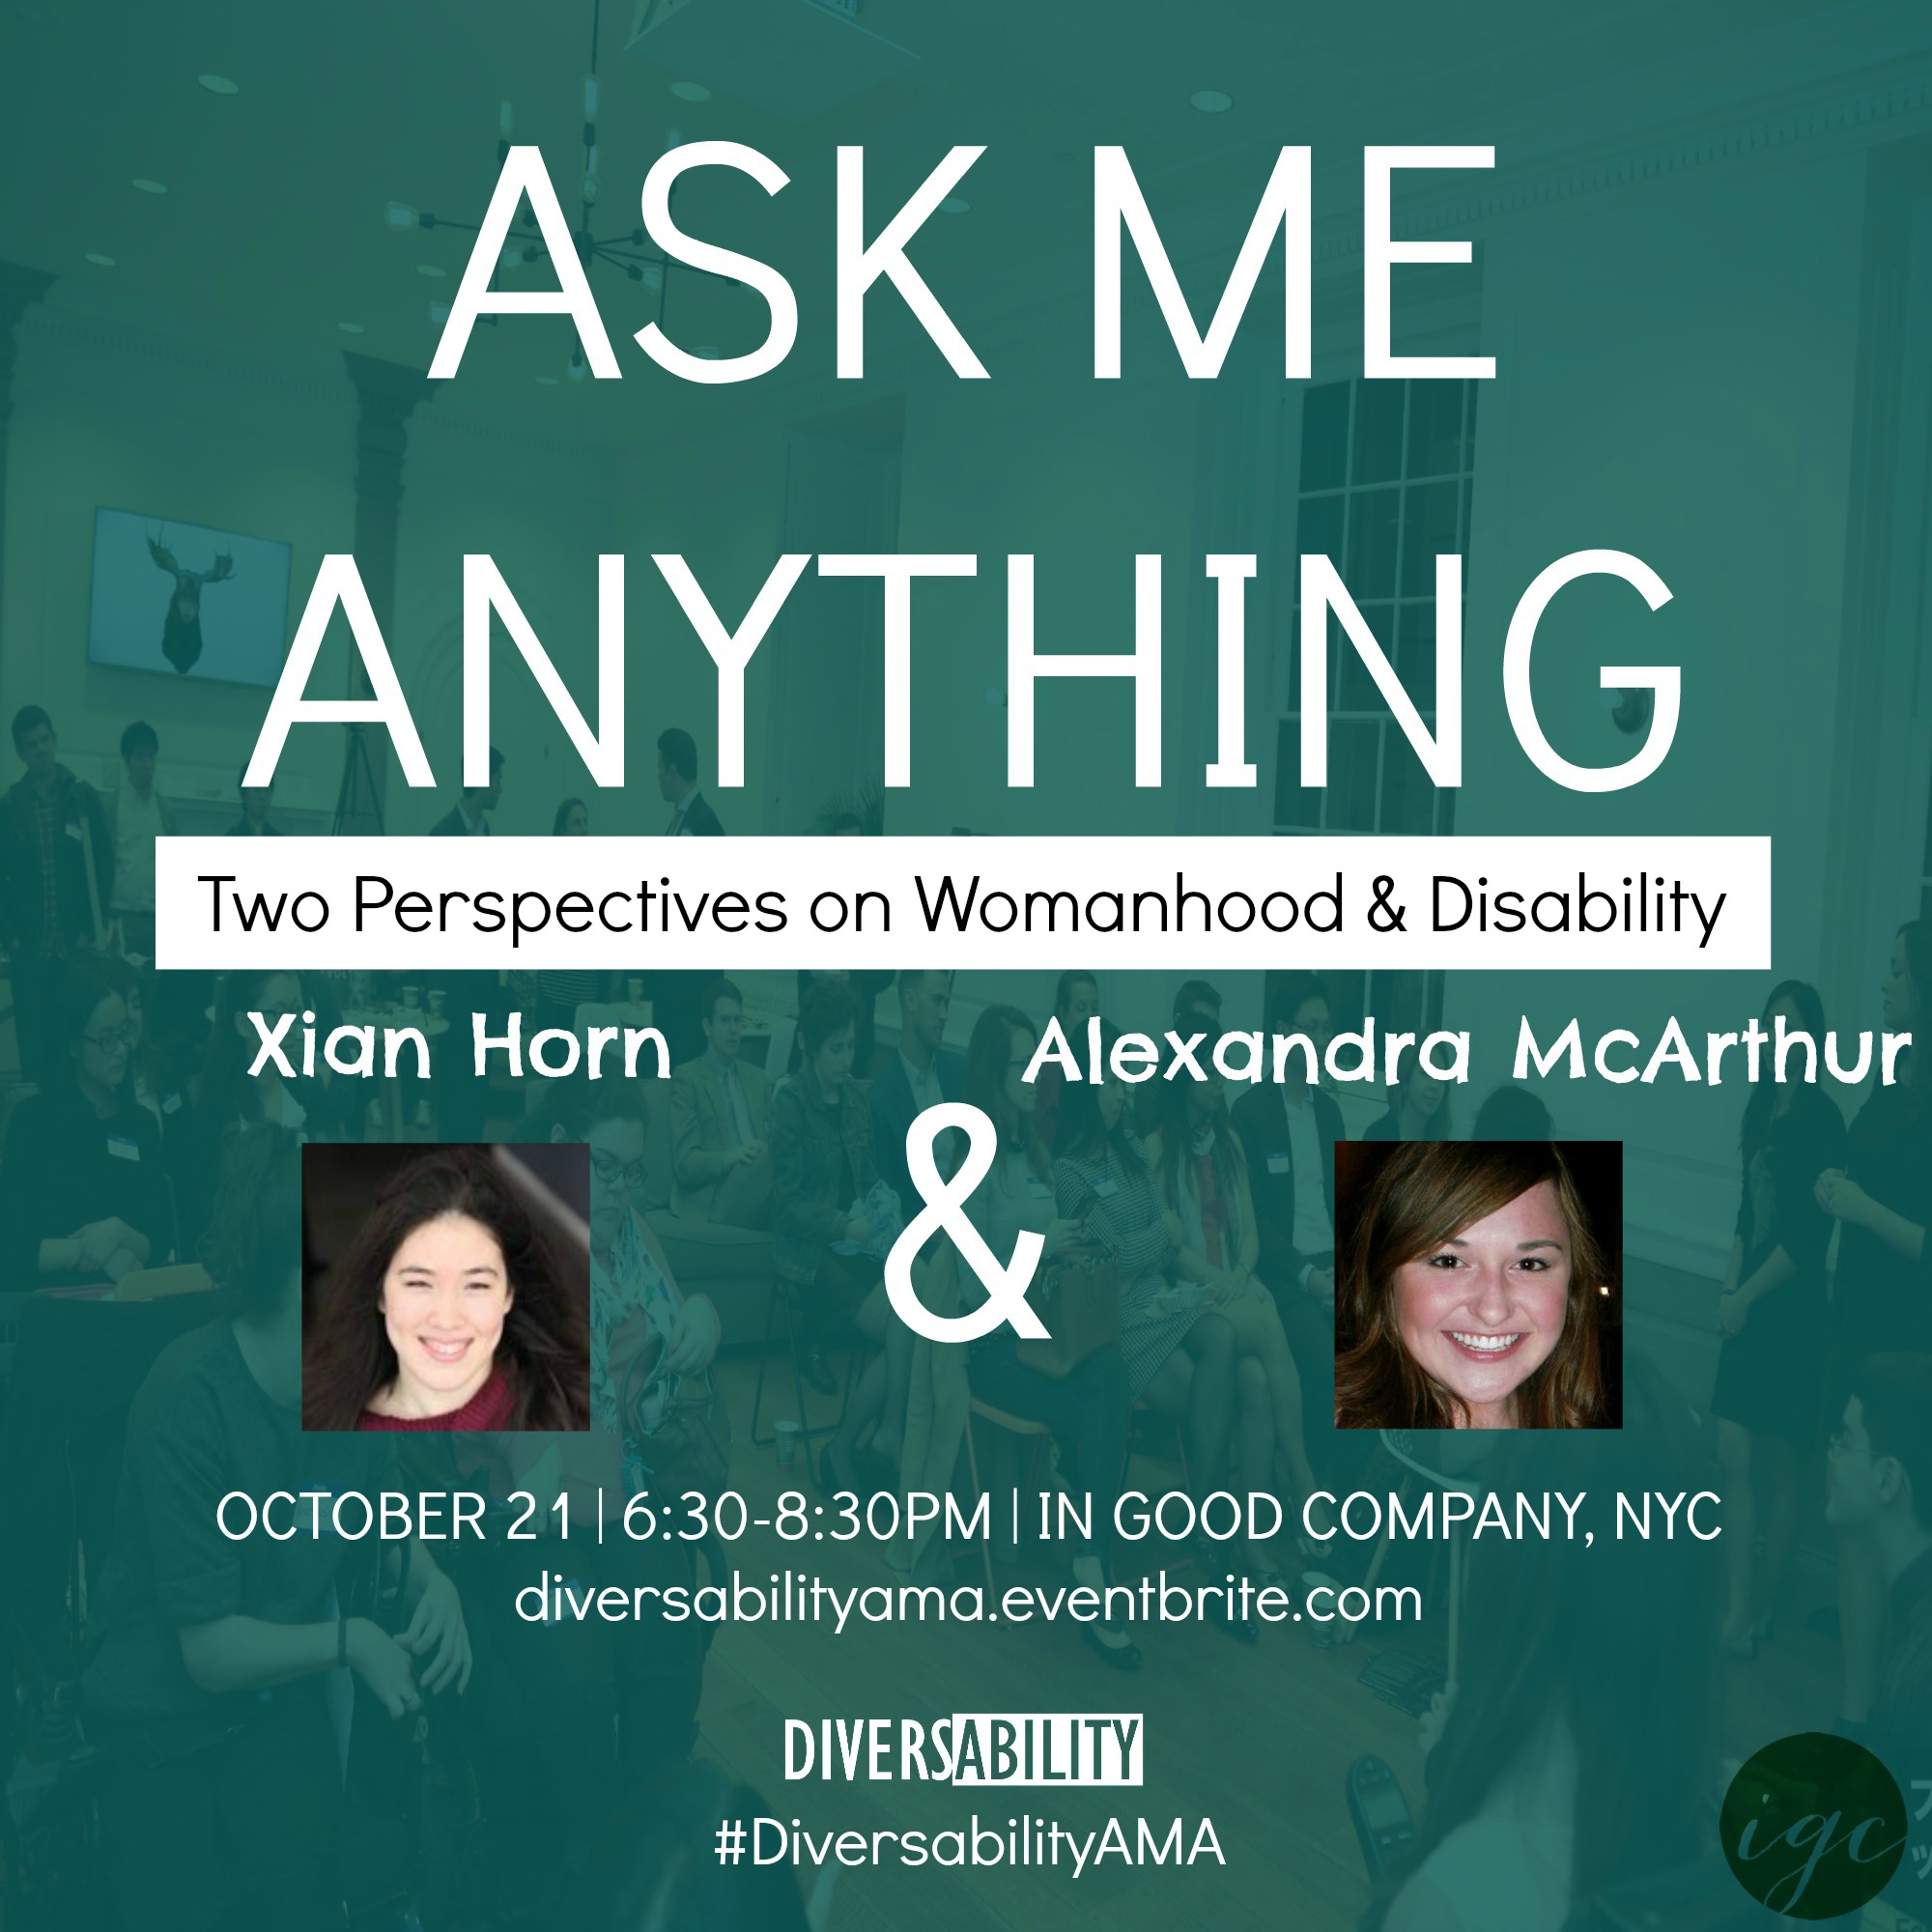 diversability ask me anything event details